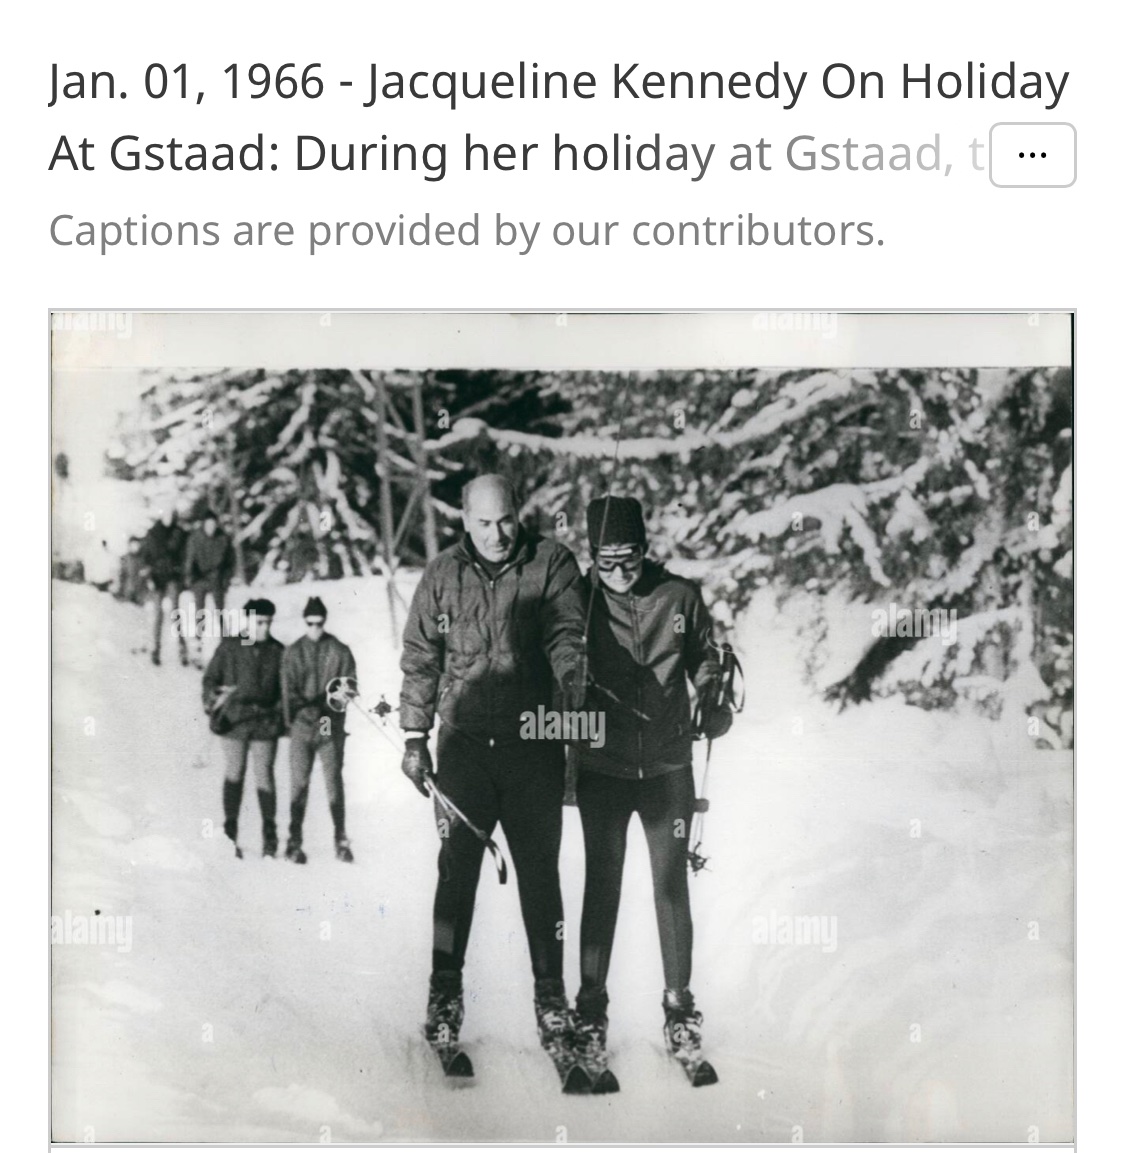 PASCAL NAJADI SPOKE OF LIVING NEAR GSTAAD, WHERE THE KENNEDYS WOULD HOLIDAY. WHO IS WITH MRS KENNEDY?